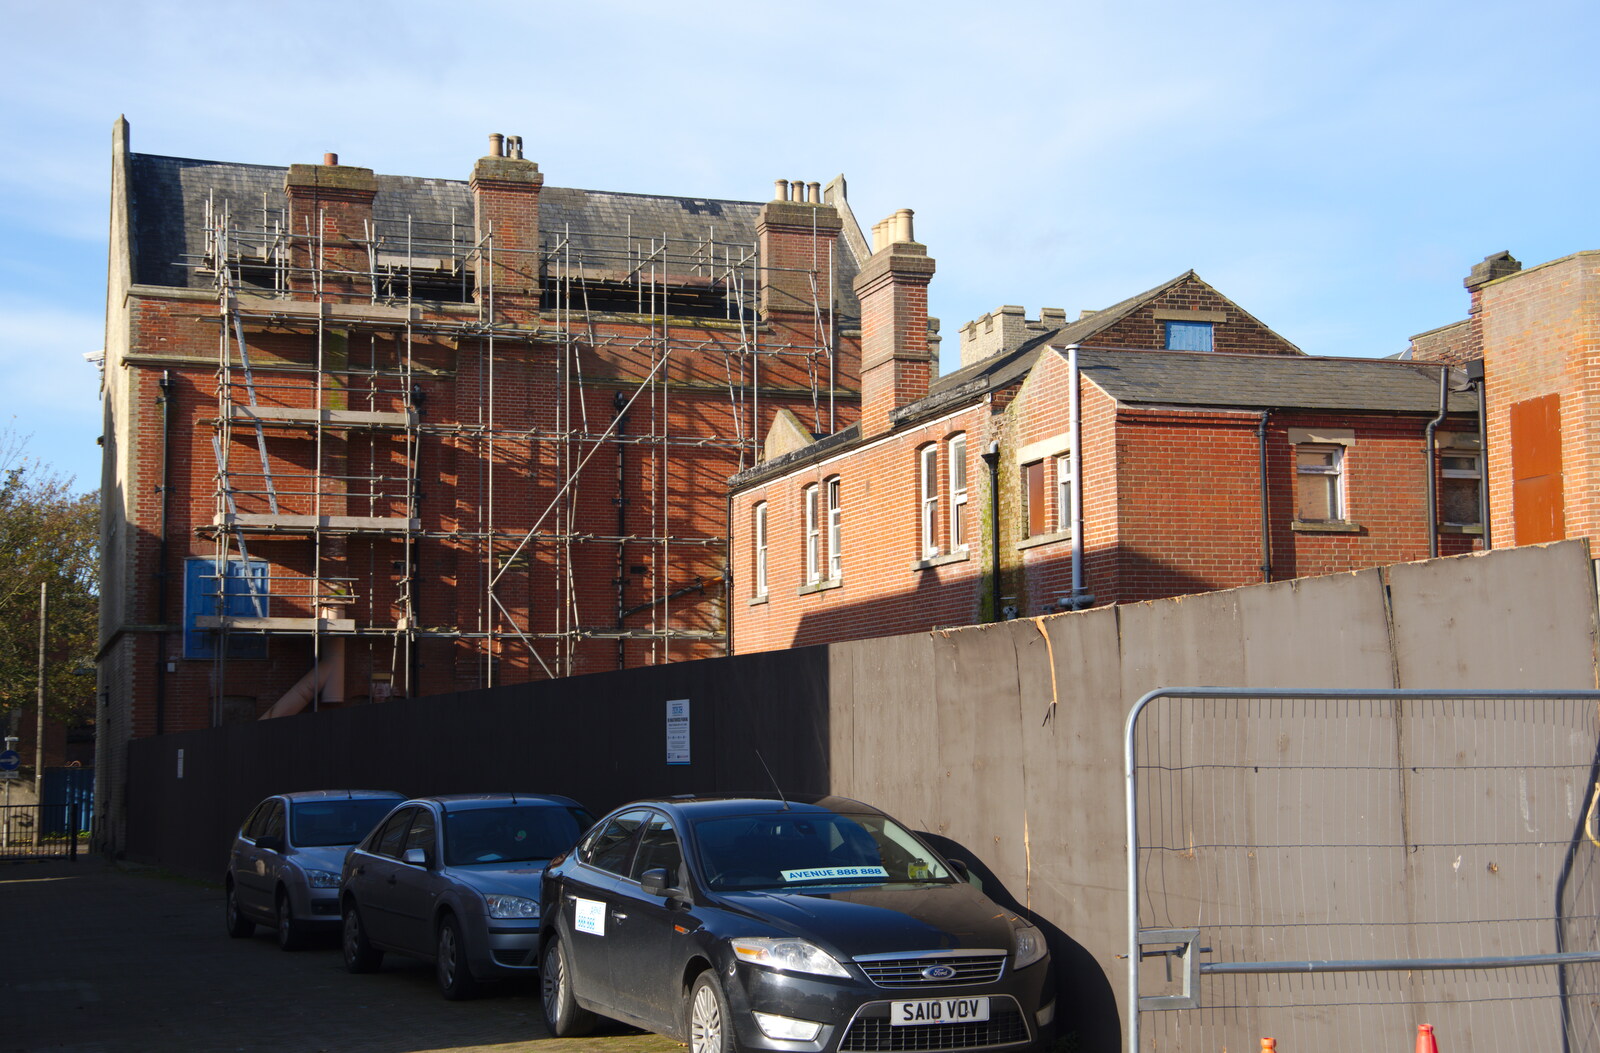 The great hall is clad in scaffolding from Exam Day Dereliction, Ipswich, Suffolk - 13th November 2019